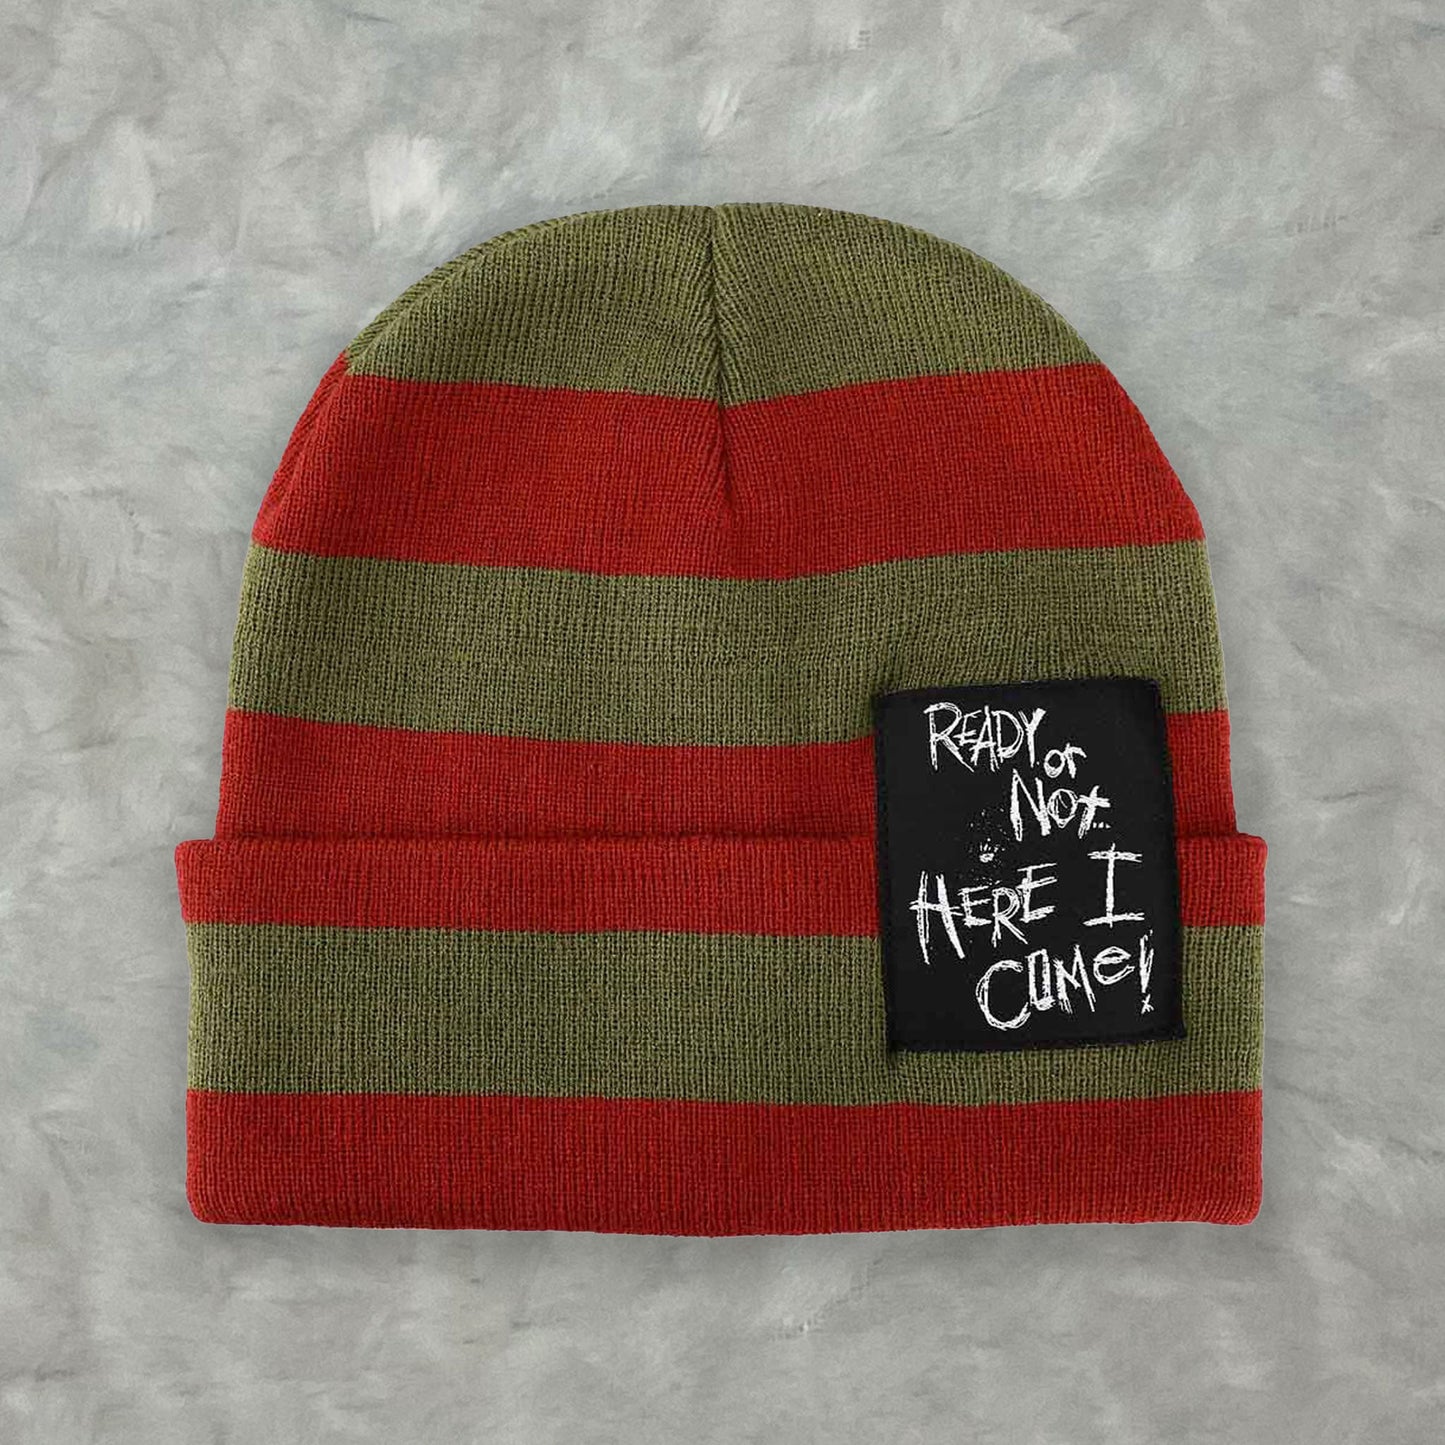 Freddy Krueger (Nightmare on Elm Street) "Ready Or Not Here I Come" Cuff Beanie Hat